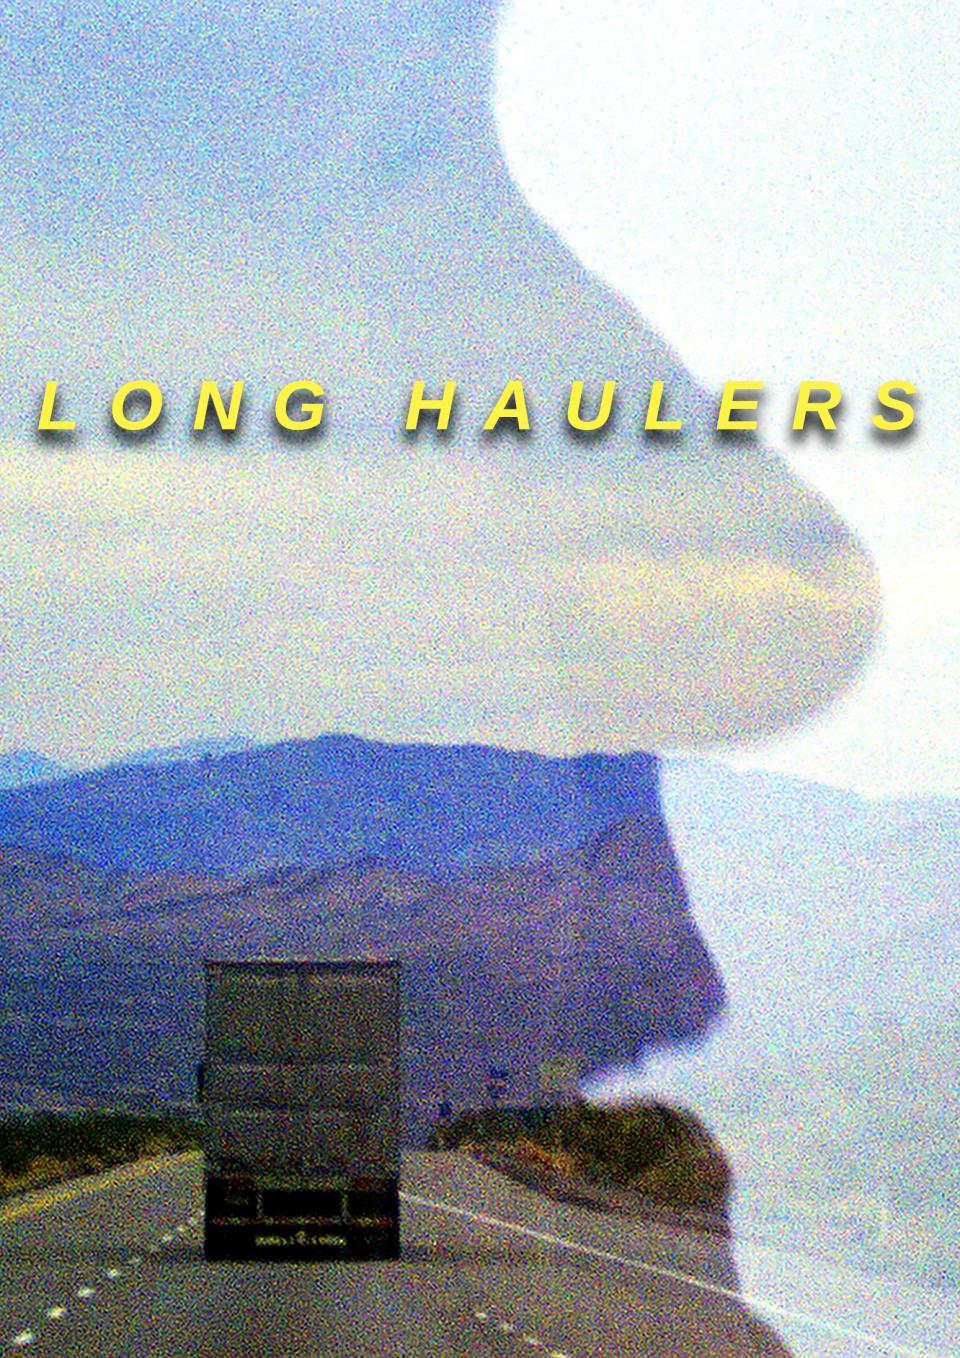 The back of a semi truck as it drives down a deserted highway towards a distant mountain range. The outline of a face cuts across the image and the title floats above "Long Haulers"